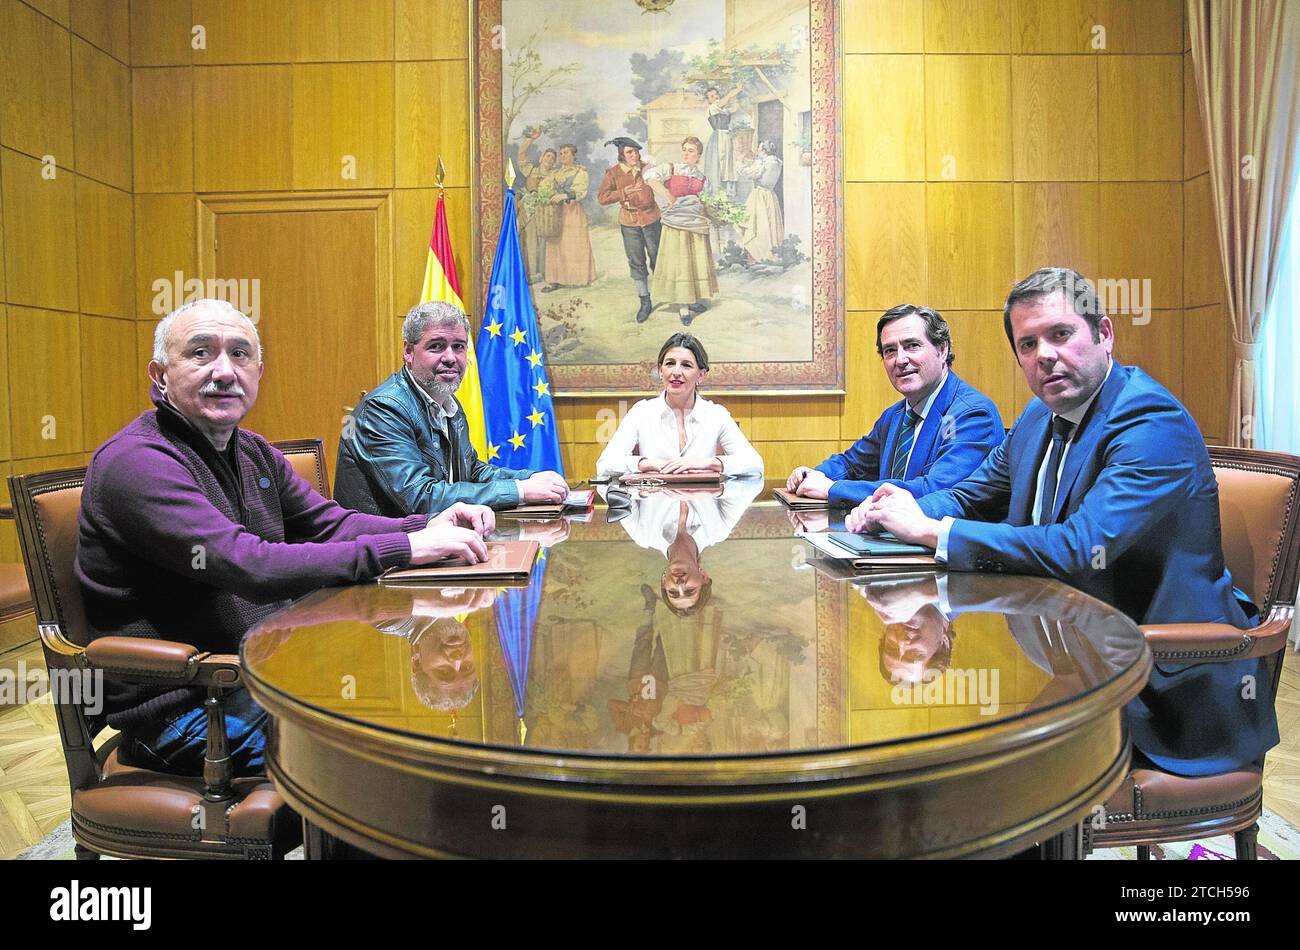 Madrid, 01/22/2020. The new Minister of Labor and Social Economy, Yolanda Díaz, meets with the leaders of the majority unions, CC.OO. and UGT, and with those of CEOE. Photo: Ángel de Antonio. ARCHDC. Credit: Album / Archivo ABC / Ángel de Antonio Stock Photo